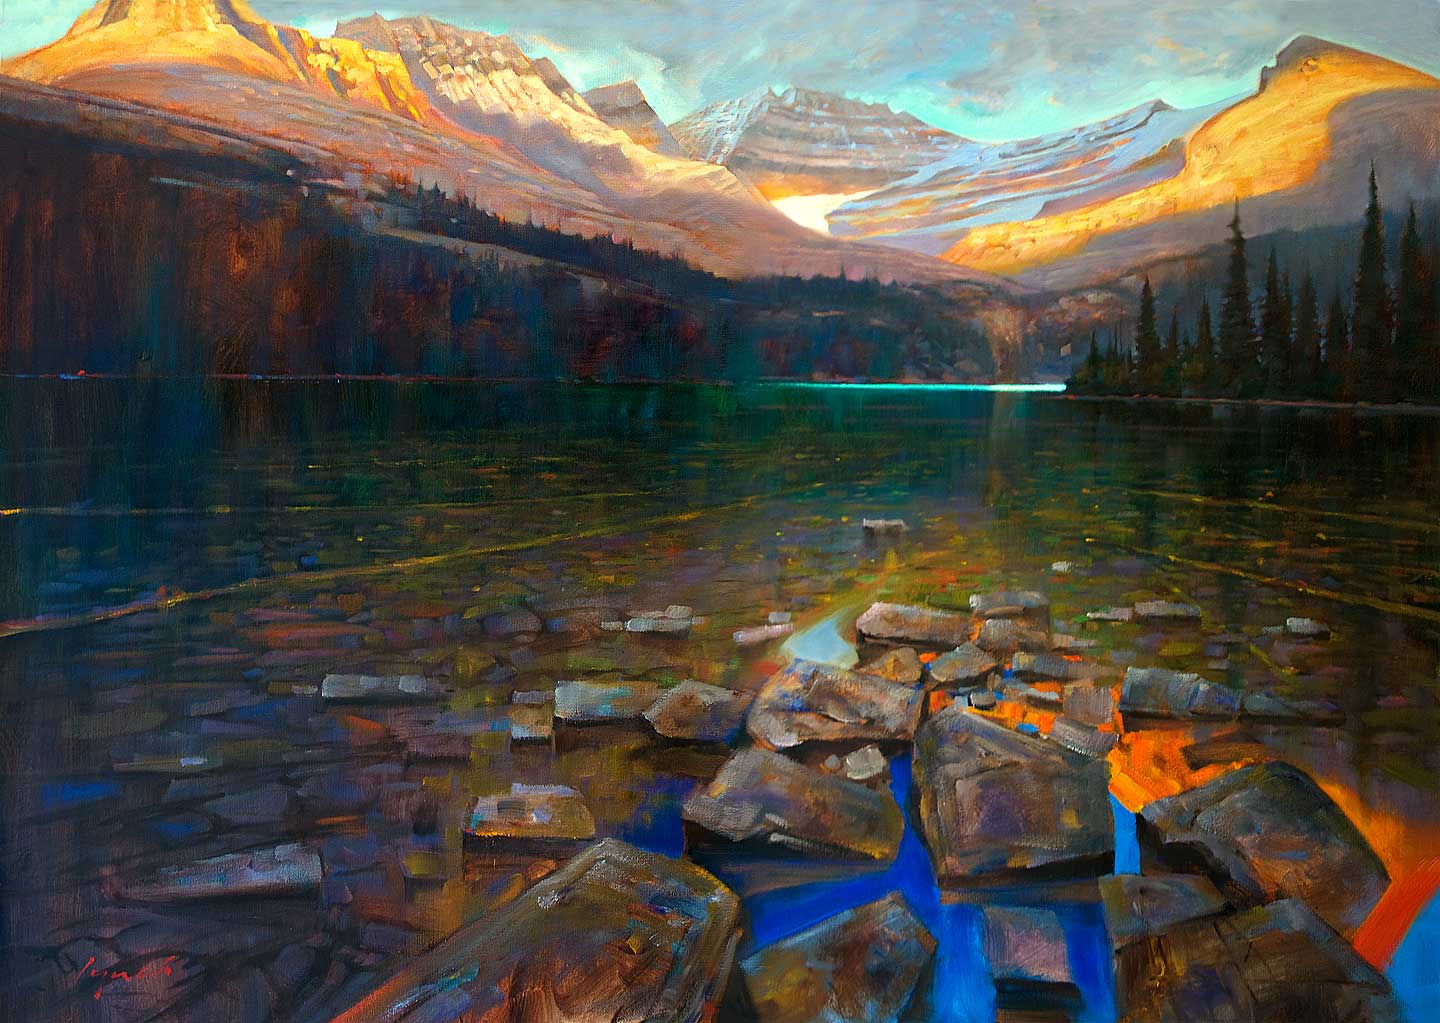 Lake O'Hara, Yoho National Park, 36 X 48 in. oil on canvas. copyright Brent Lynch